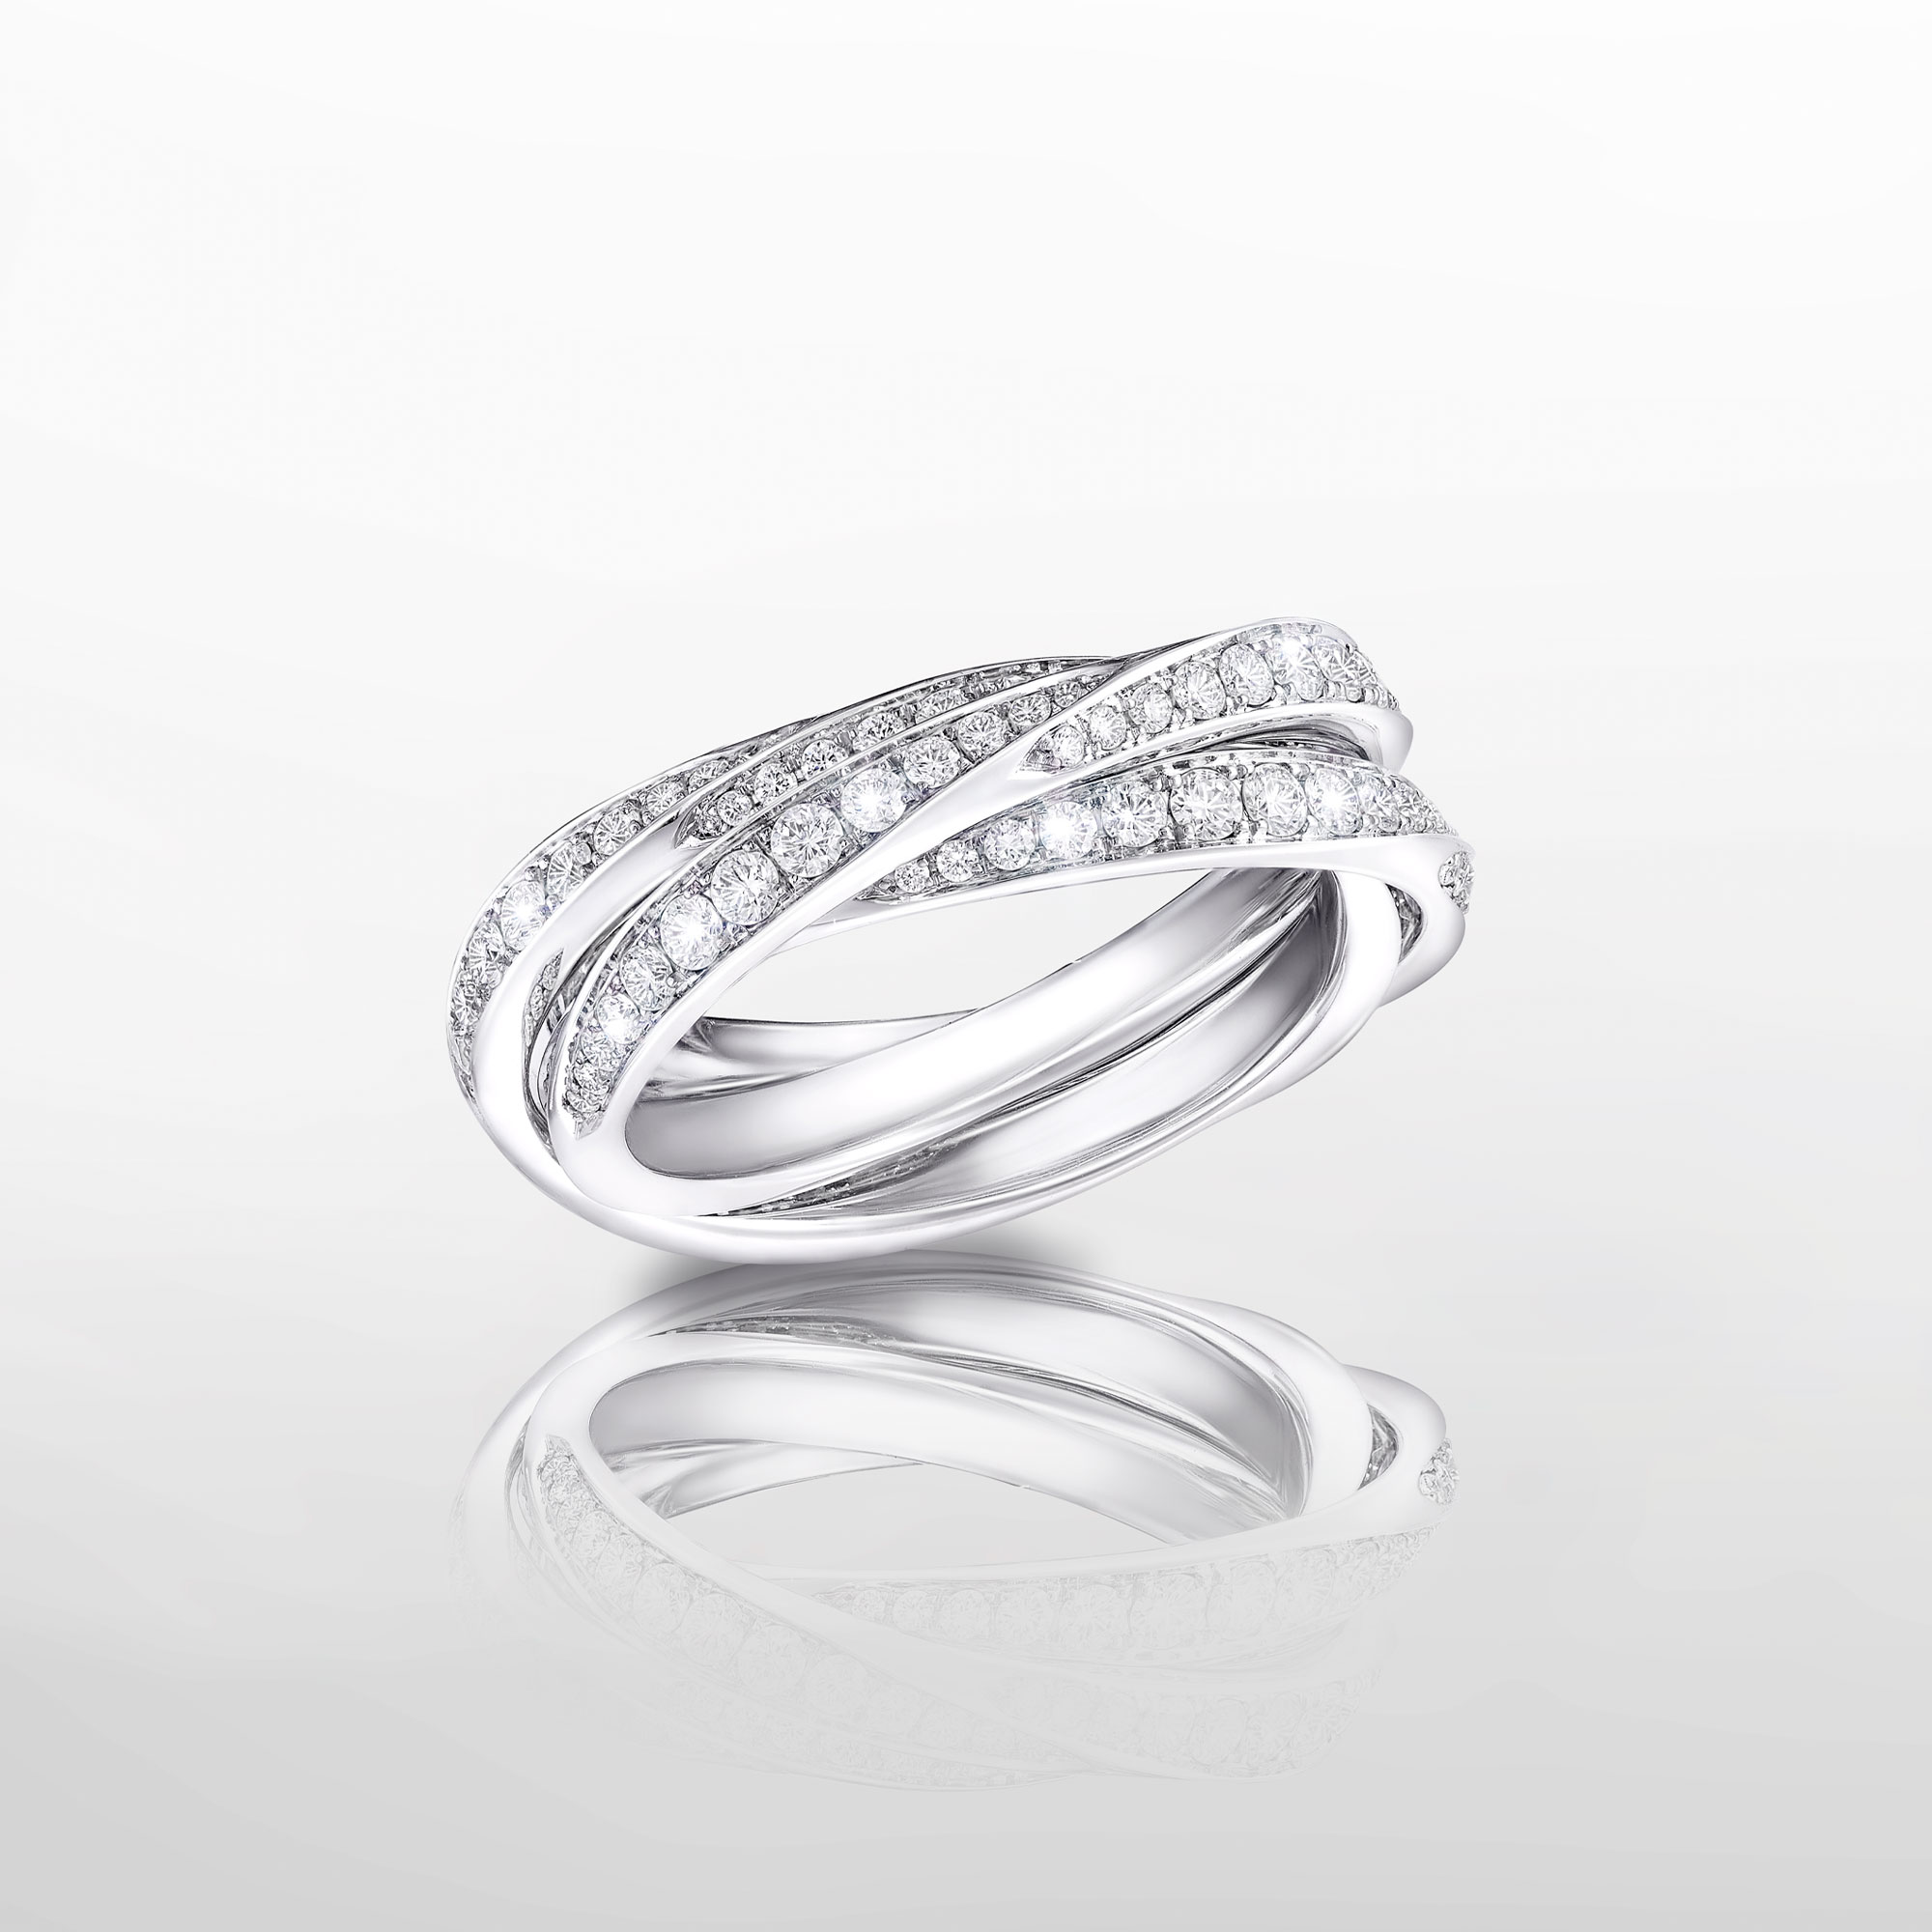 Triple Spiral Pavé Diamond Ring from the Graff Spiral Jewellery Collection